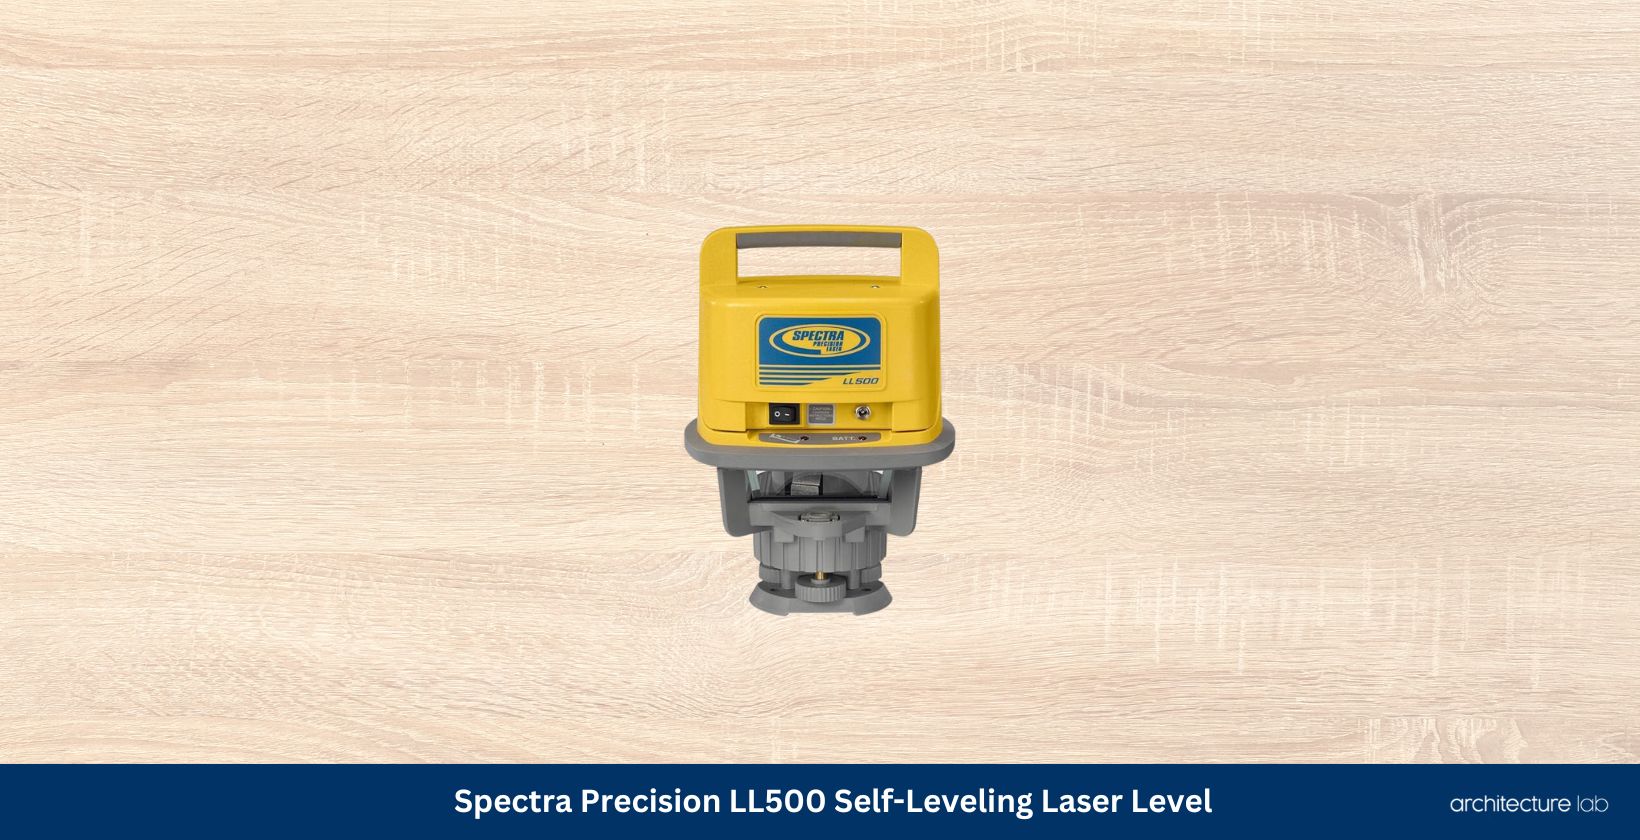 Spectra precision ll500 self leveling laser level